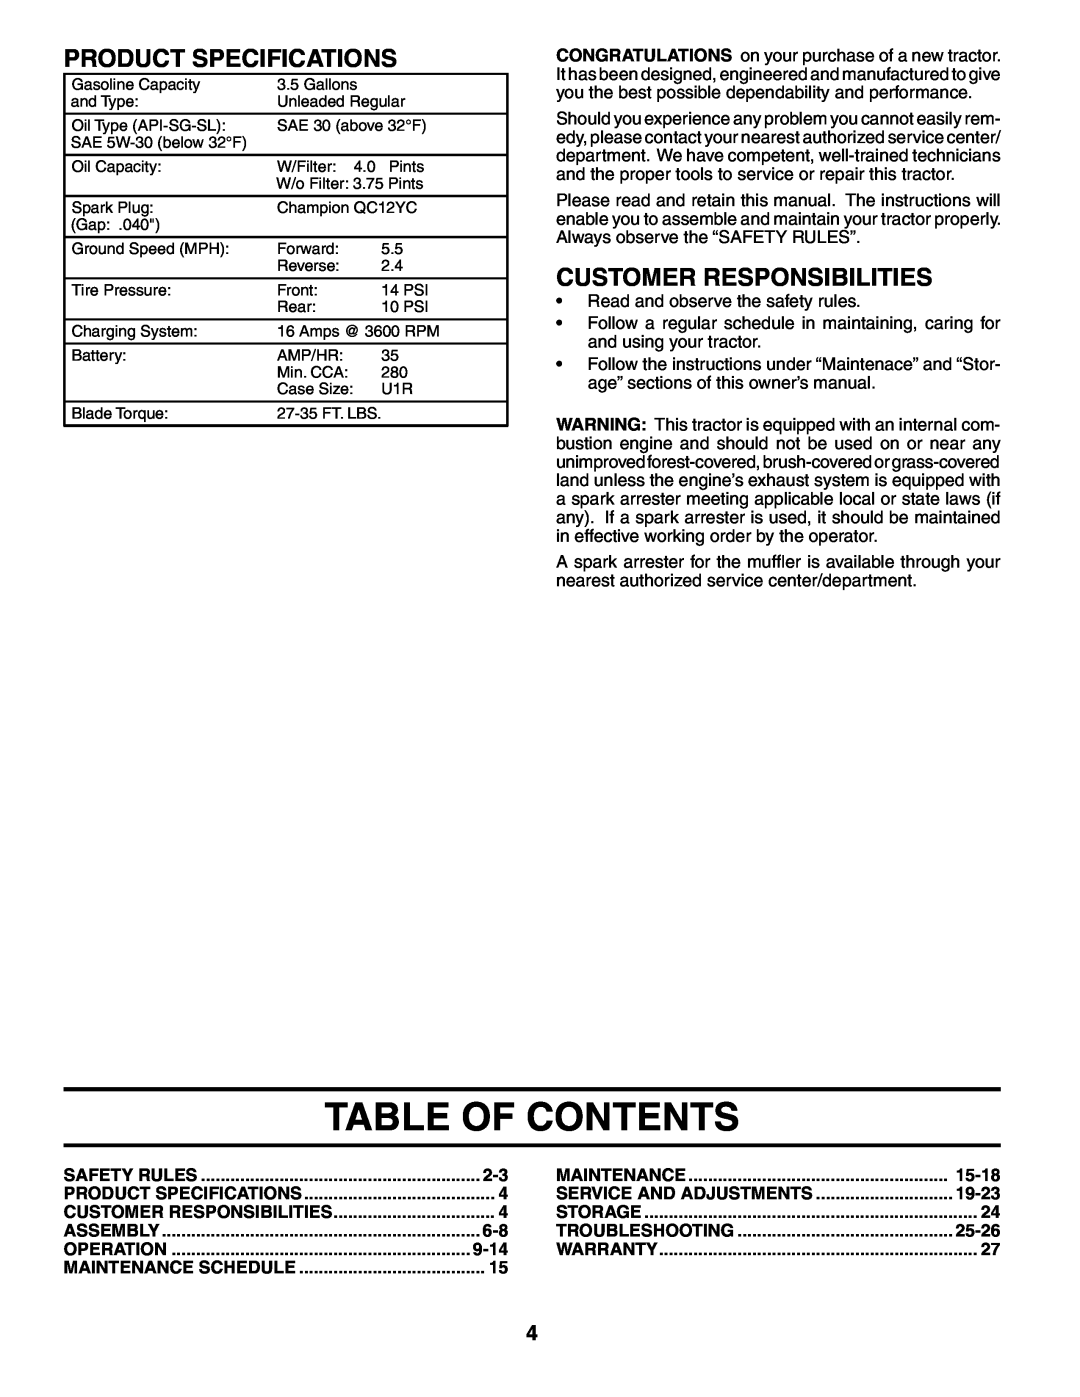 Poulan 196085 manual Table Of Contents, Product Specifications, Customer Responsibilities, 9-14, 15-18, 19-23, 25-26 